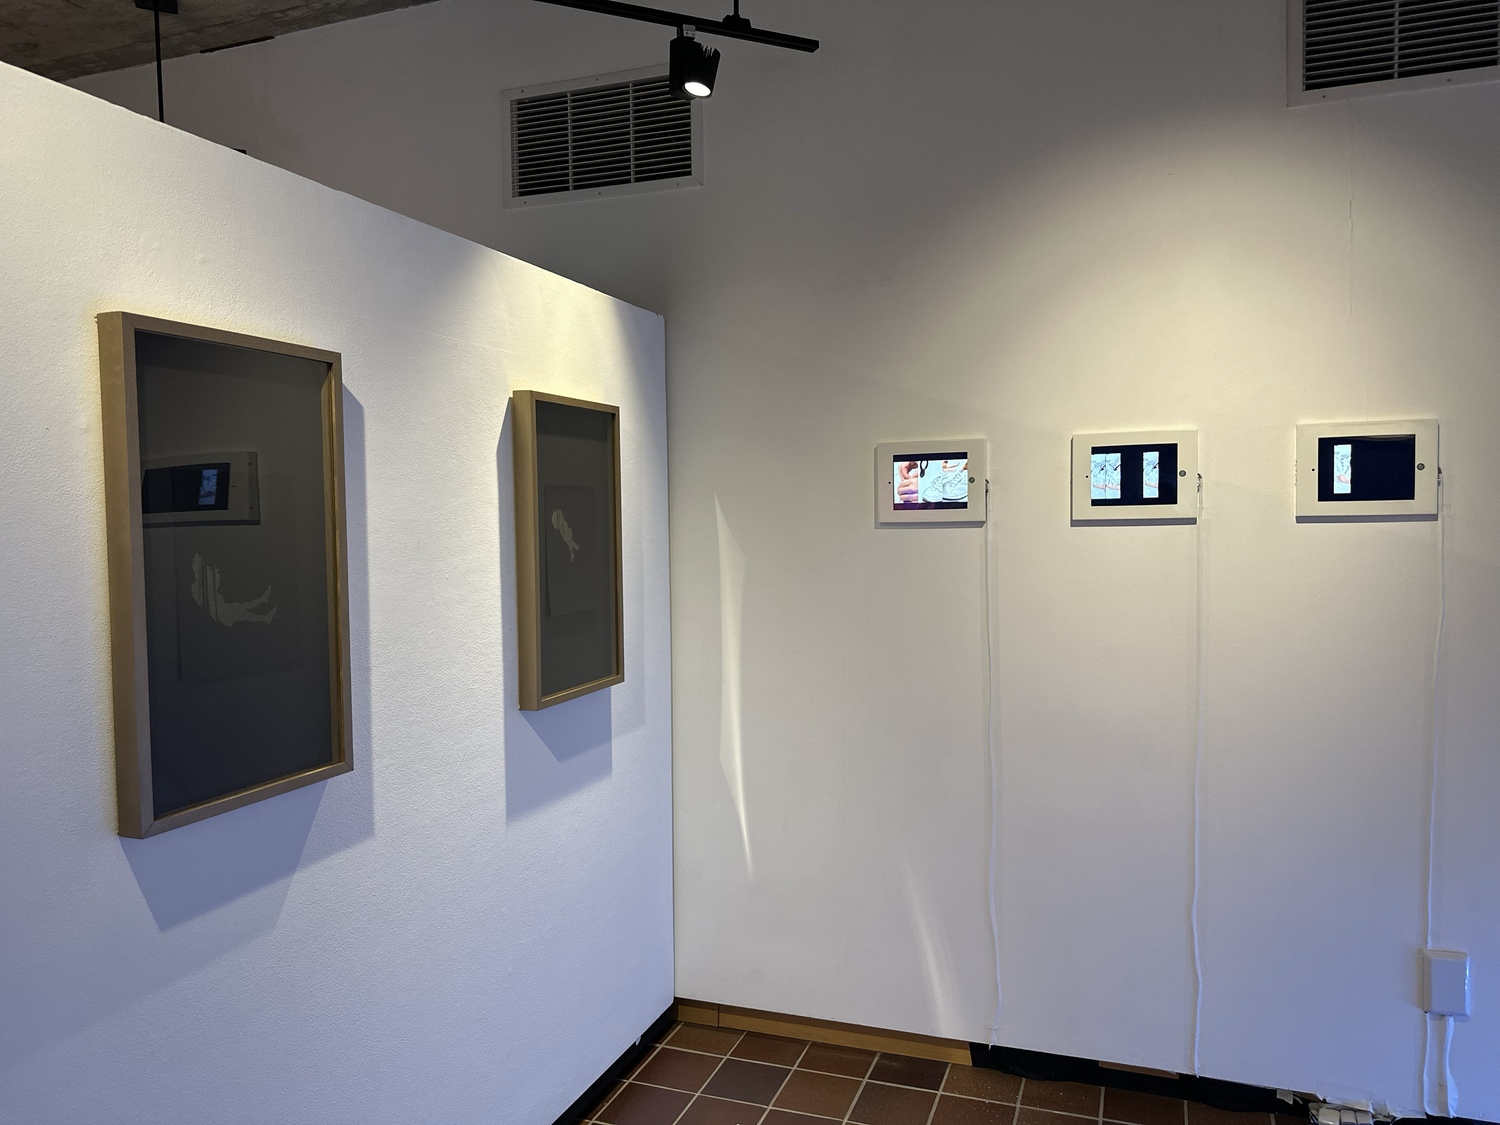 Two framed works and three iPads in a row of Ellen Mueller's work. The details of each work are difficult to see from this camera distance.